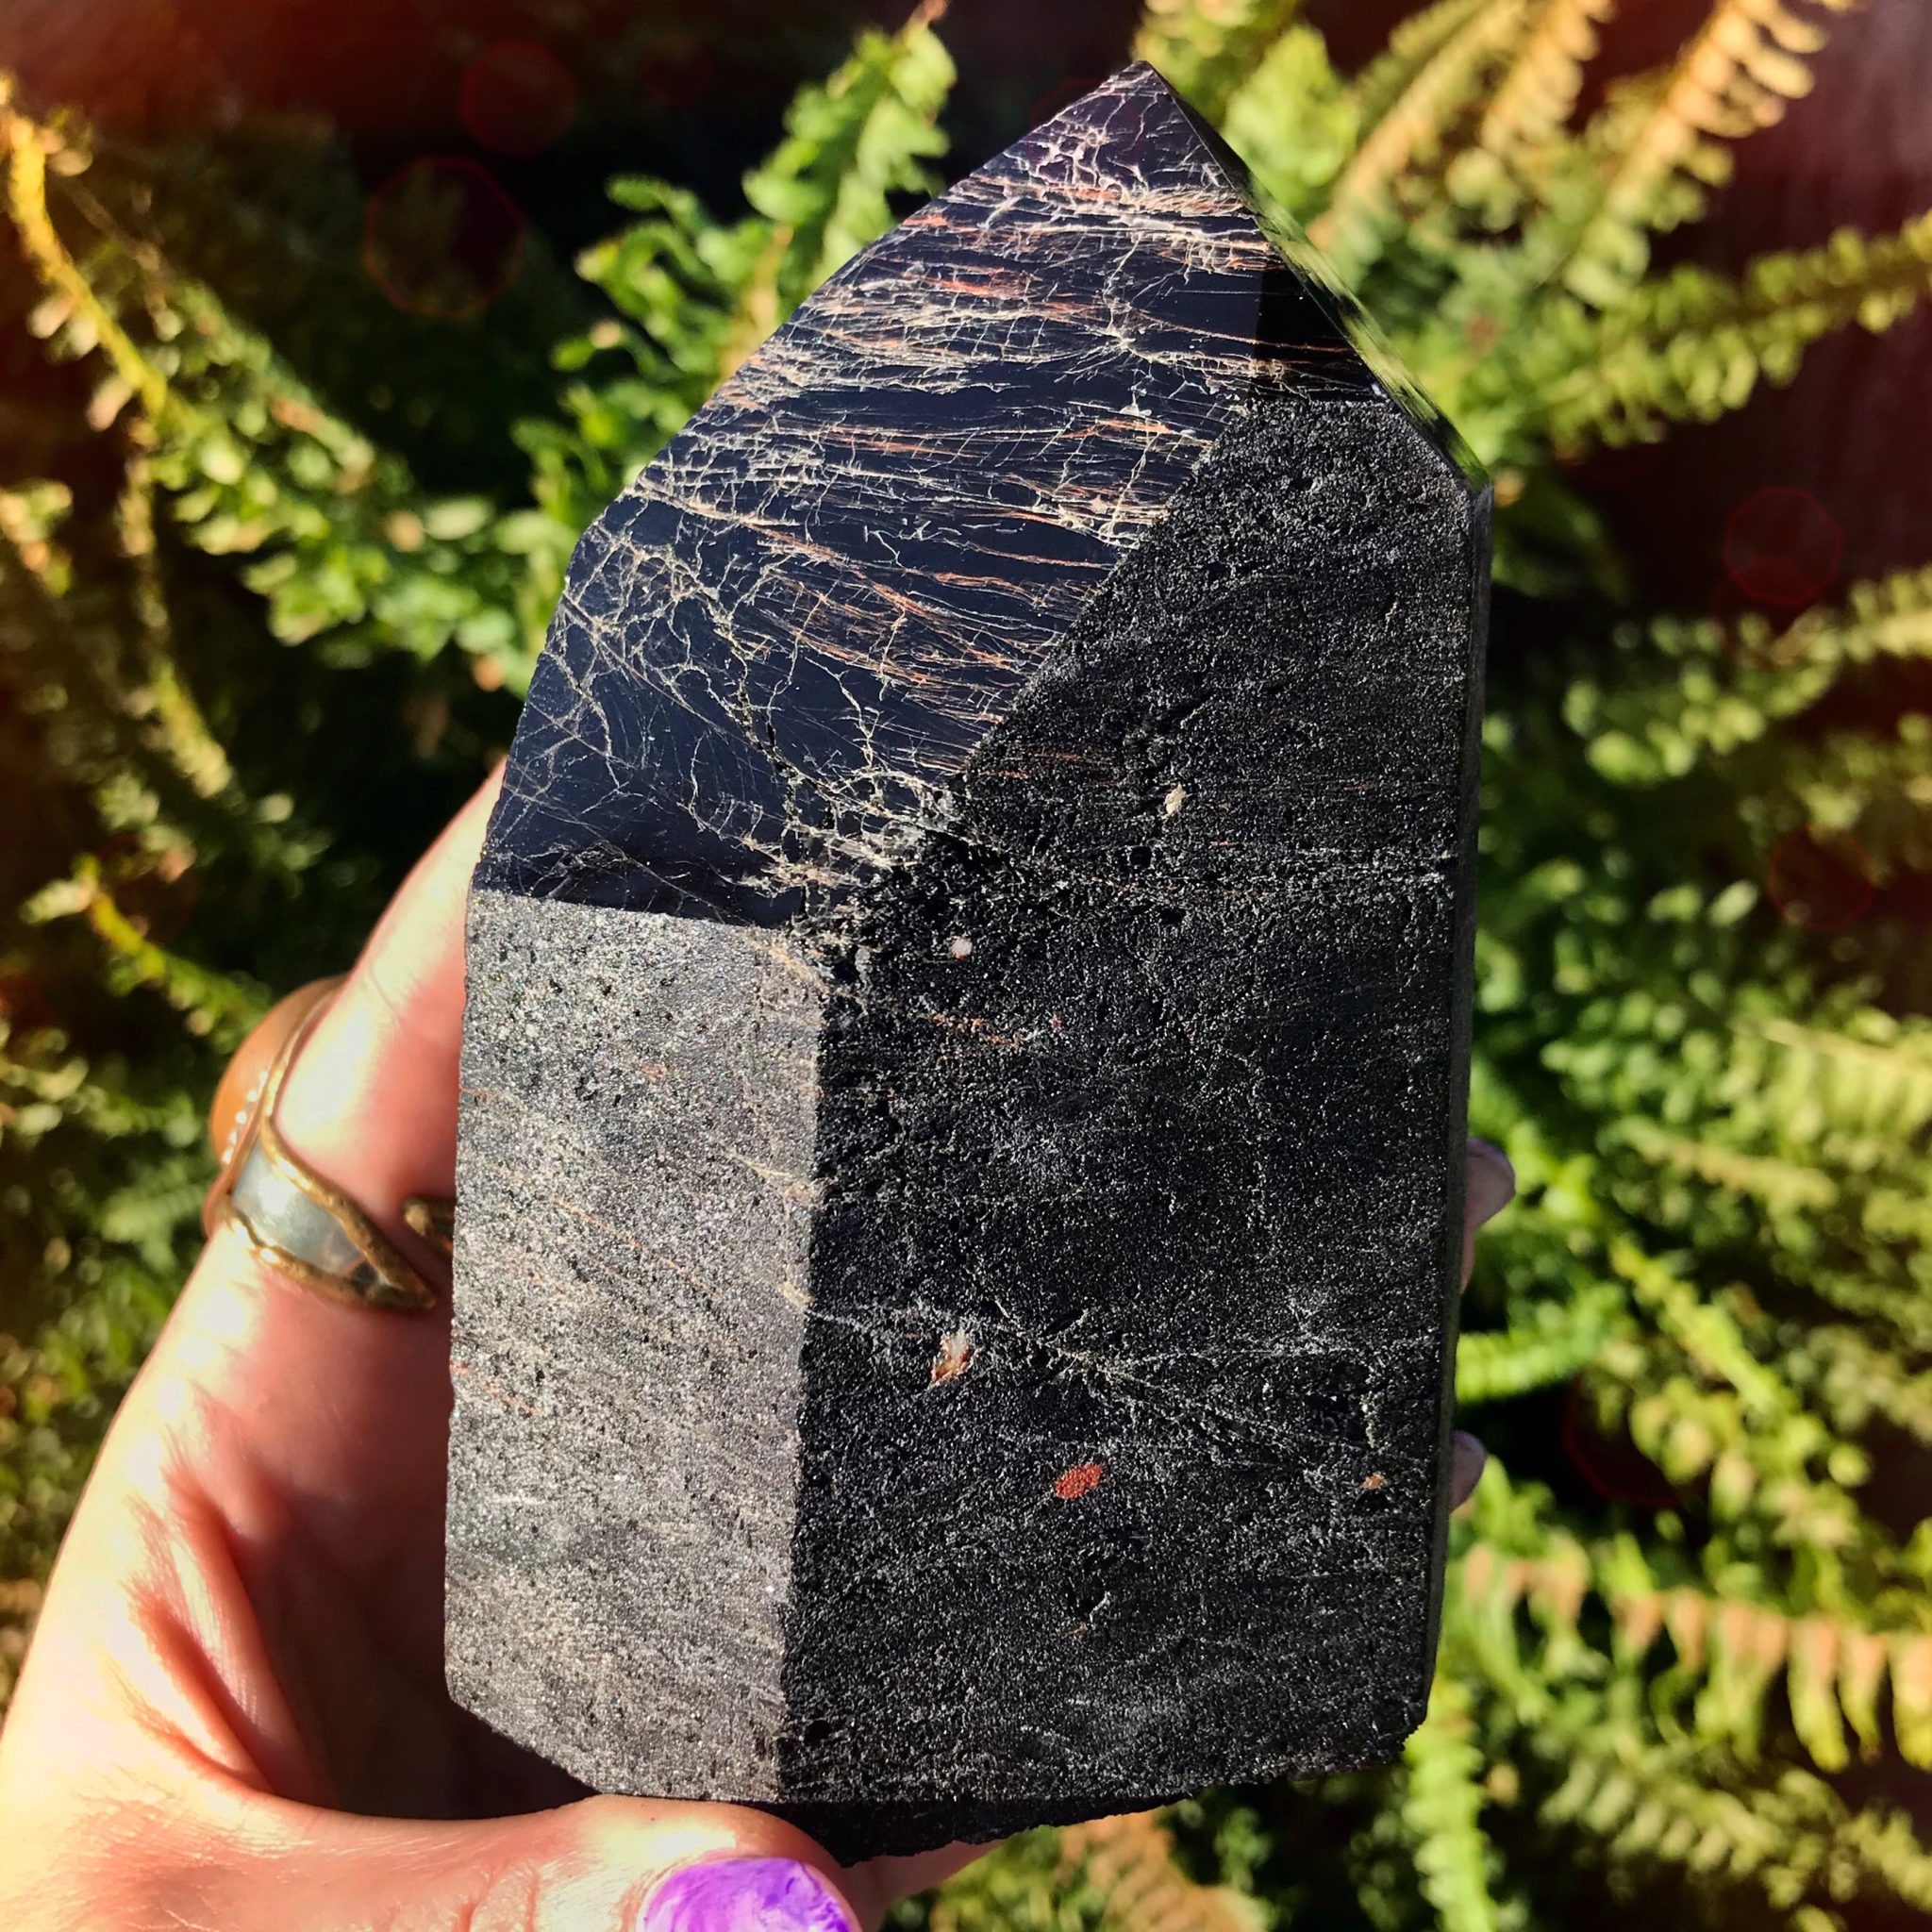 Powerful Protection! Brazil-RARE Black Tourmaline Premium Authentic Tumbled Crystals with Red Hematite Inclusions